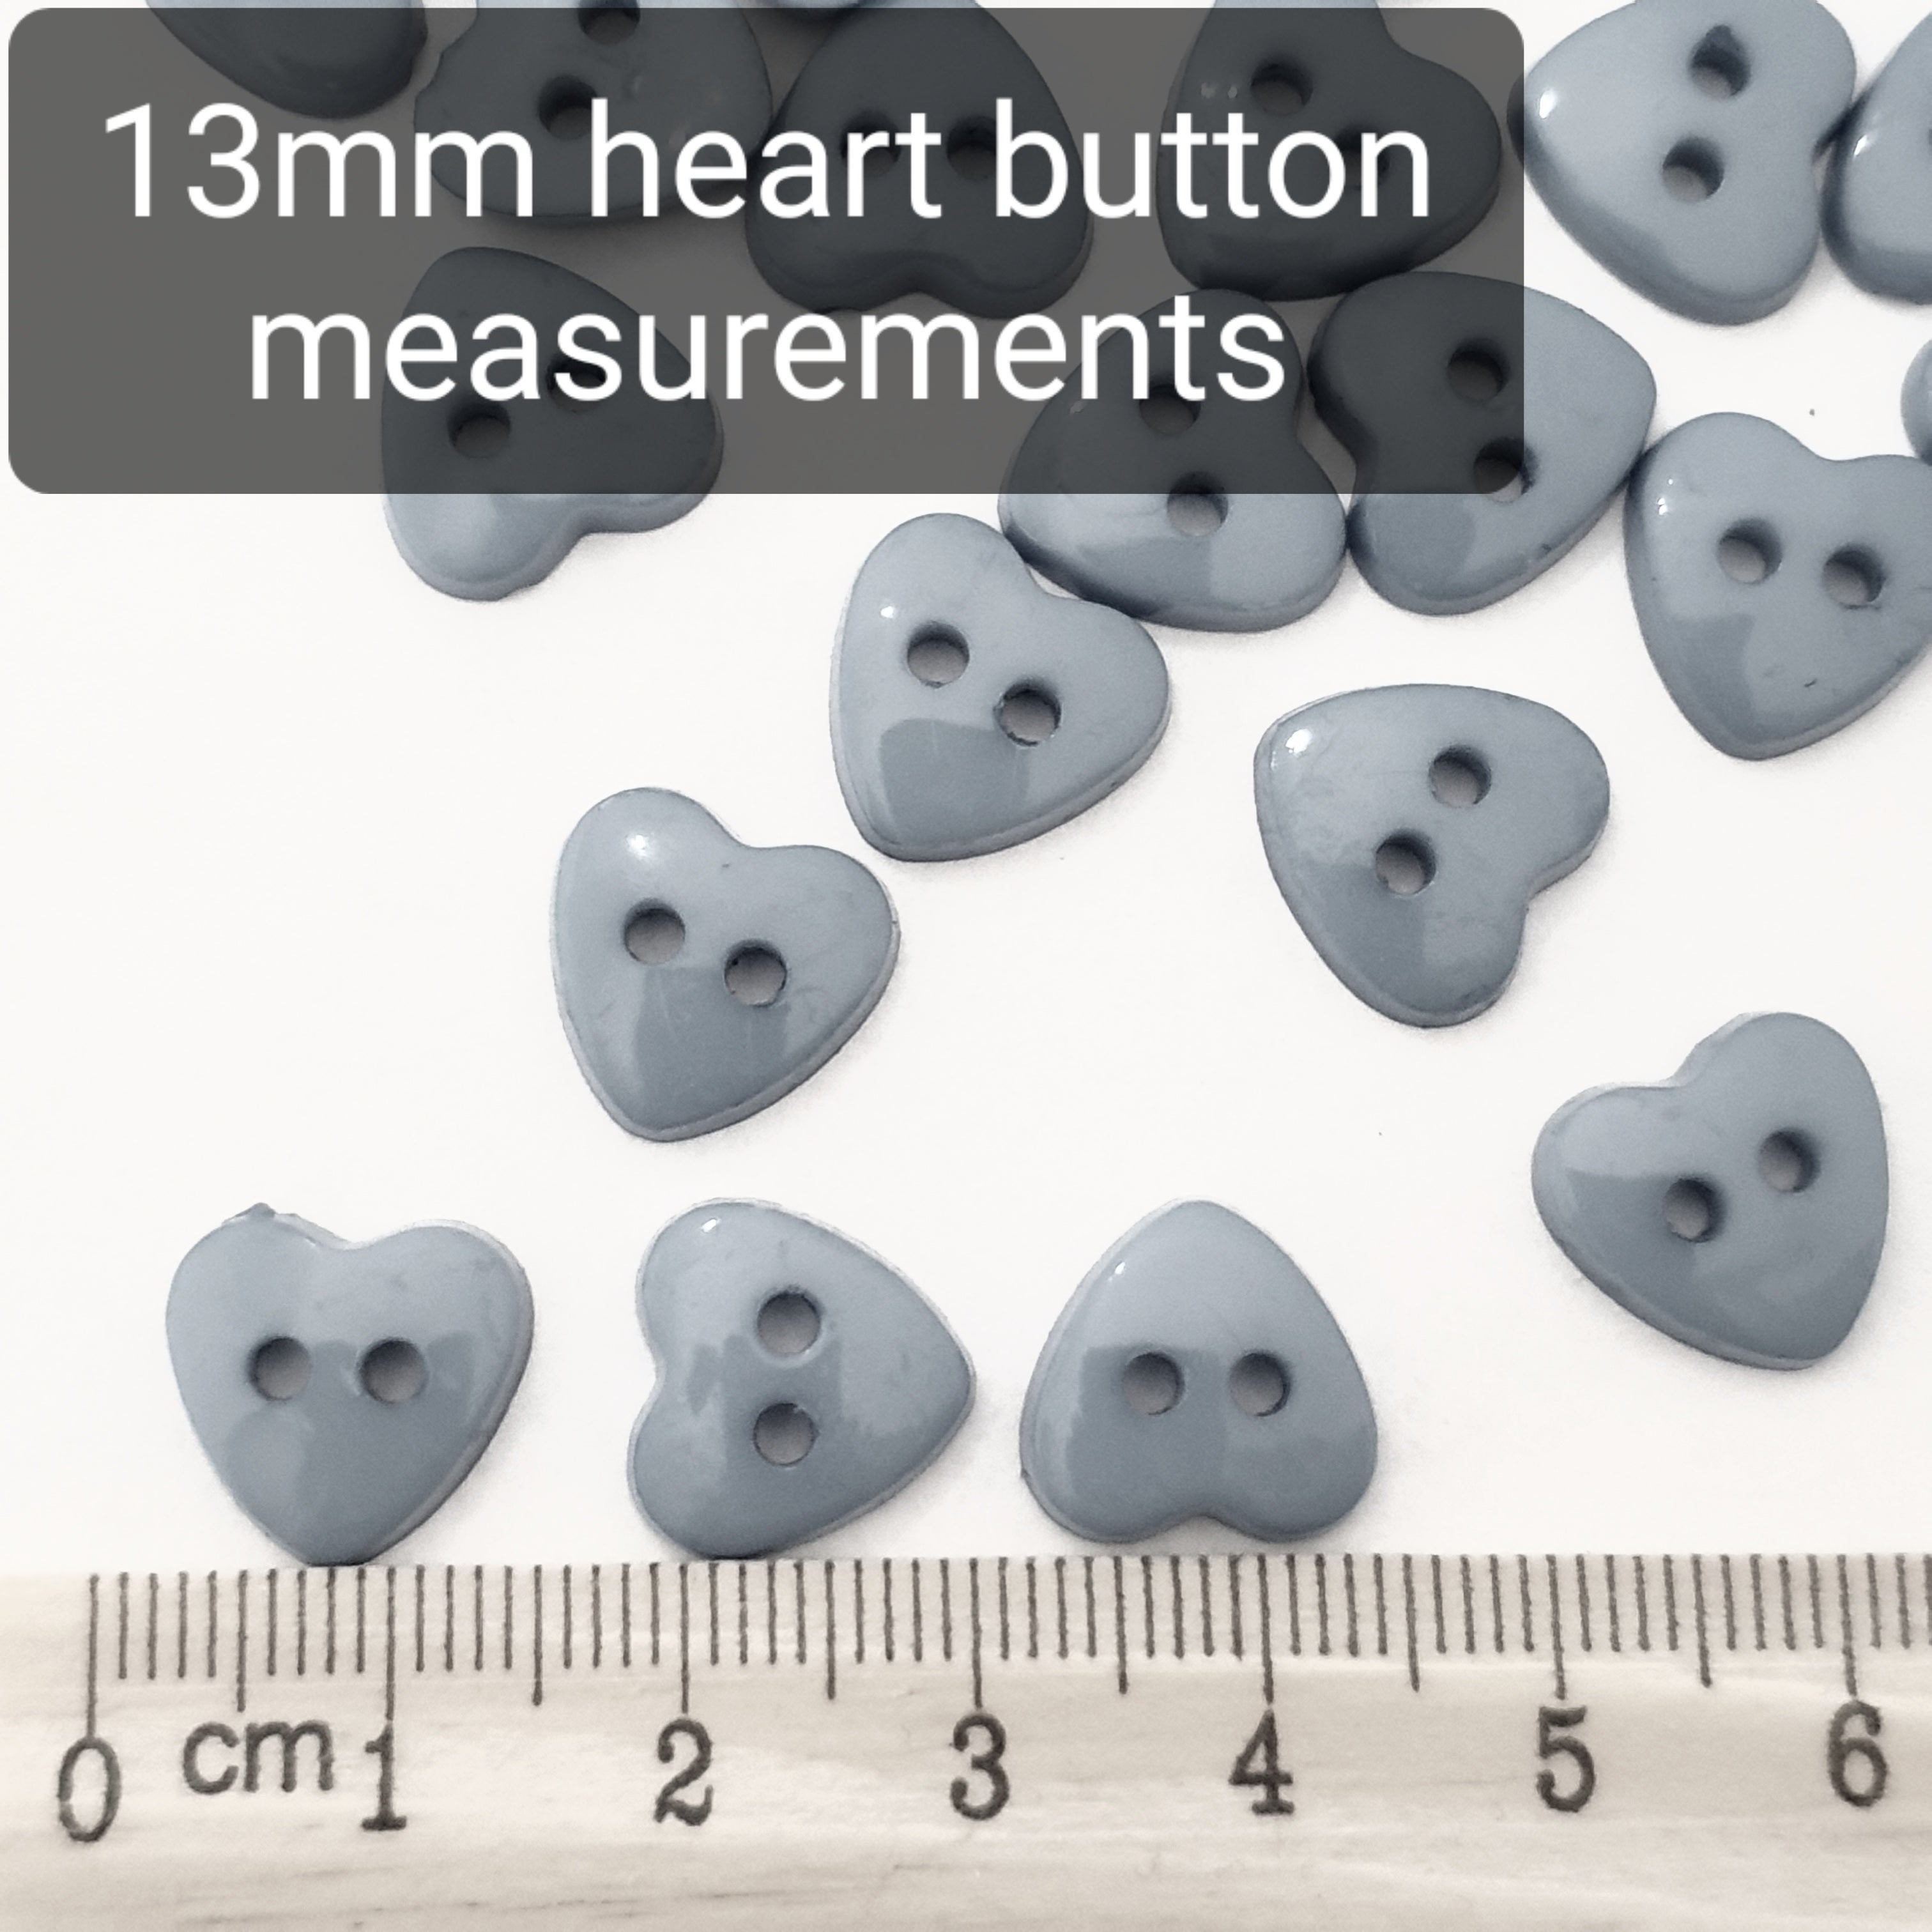 MajorCrafts 60pcs 13mm Lime Green Heart Shaped 2 Holes Resin Sewing Buttons